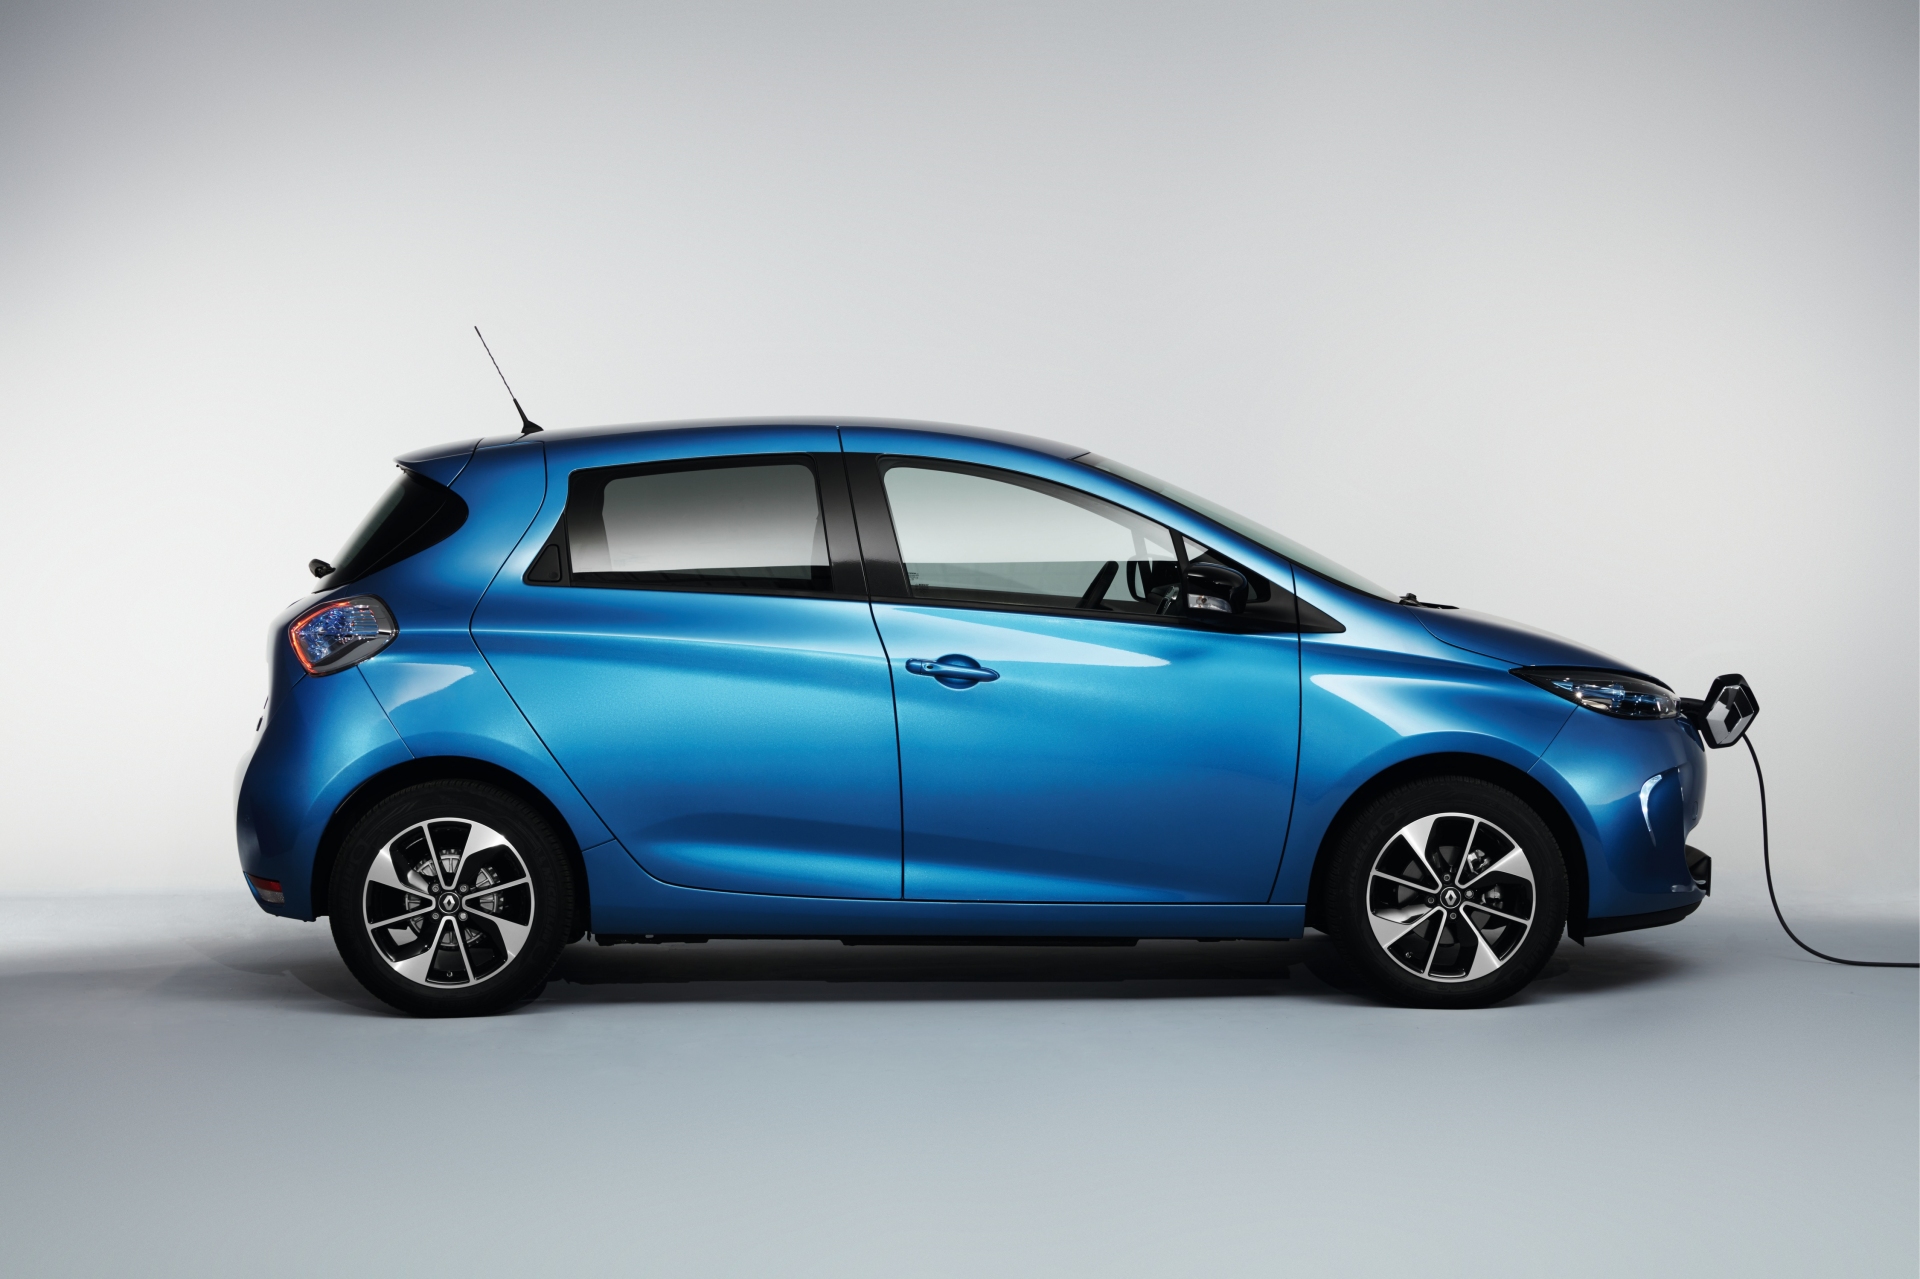 Renault ZOE - Blue Exterior - Side View - Green Machine | A Closer Look At Electric Cars And Hybrid Vehicles